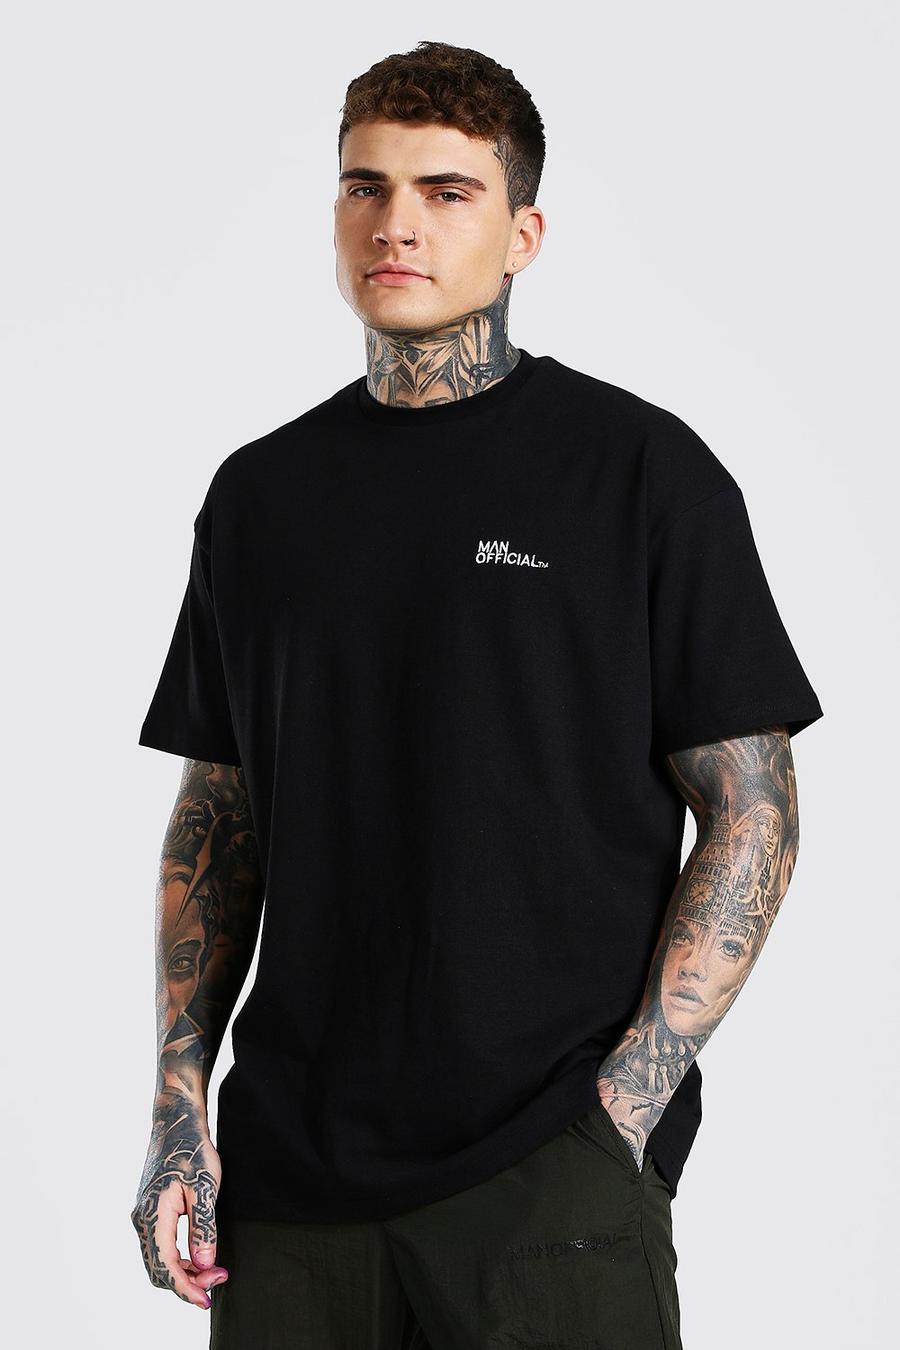 Black Oversized Man Official Heavyweight T-shirt image number 1